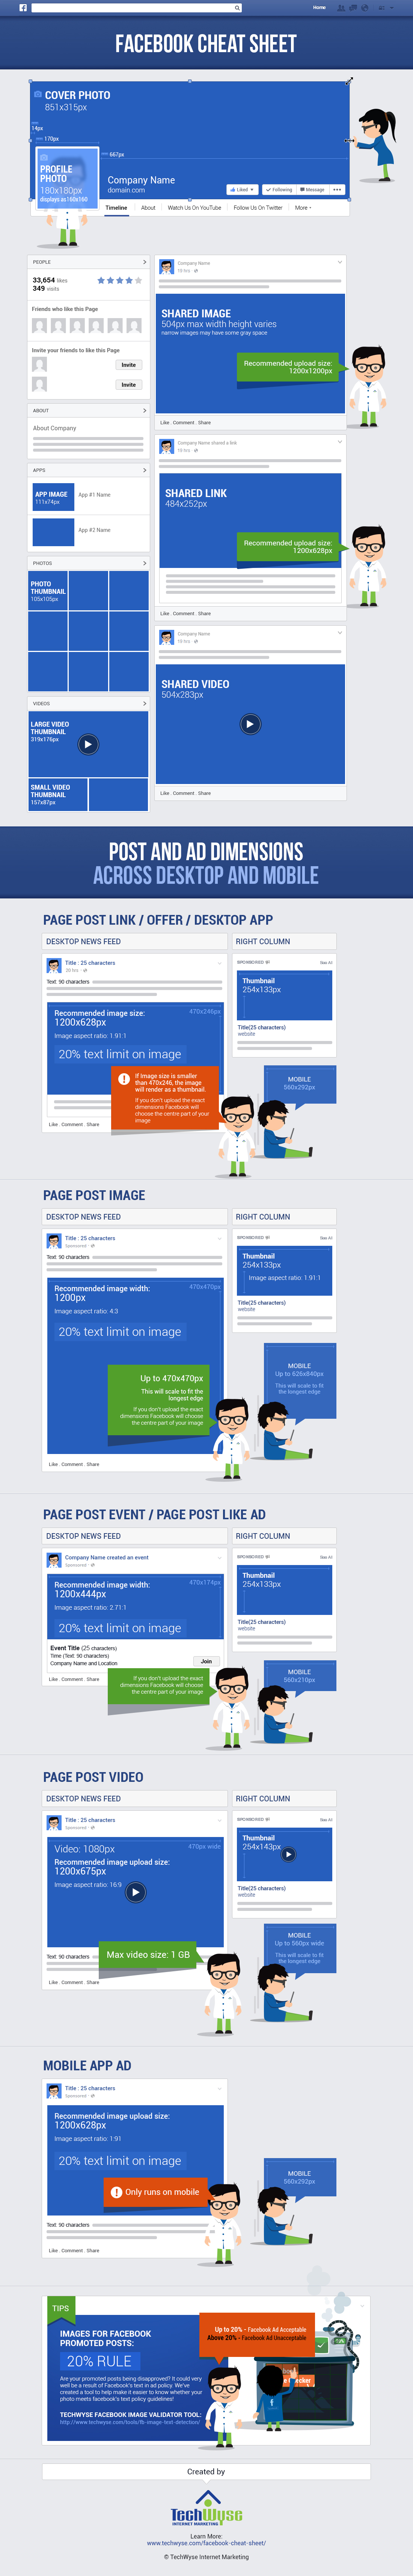 Facebook Cheat Sheet: Image Size and Dimensions UPDATED!